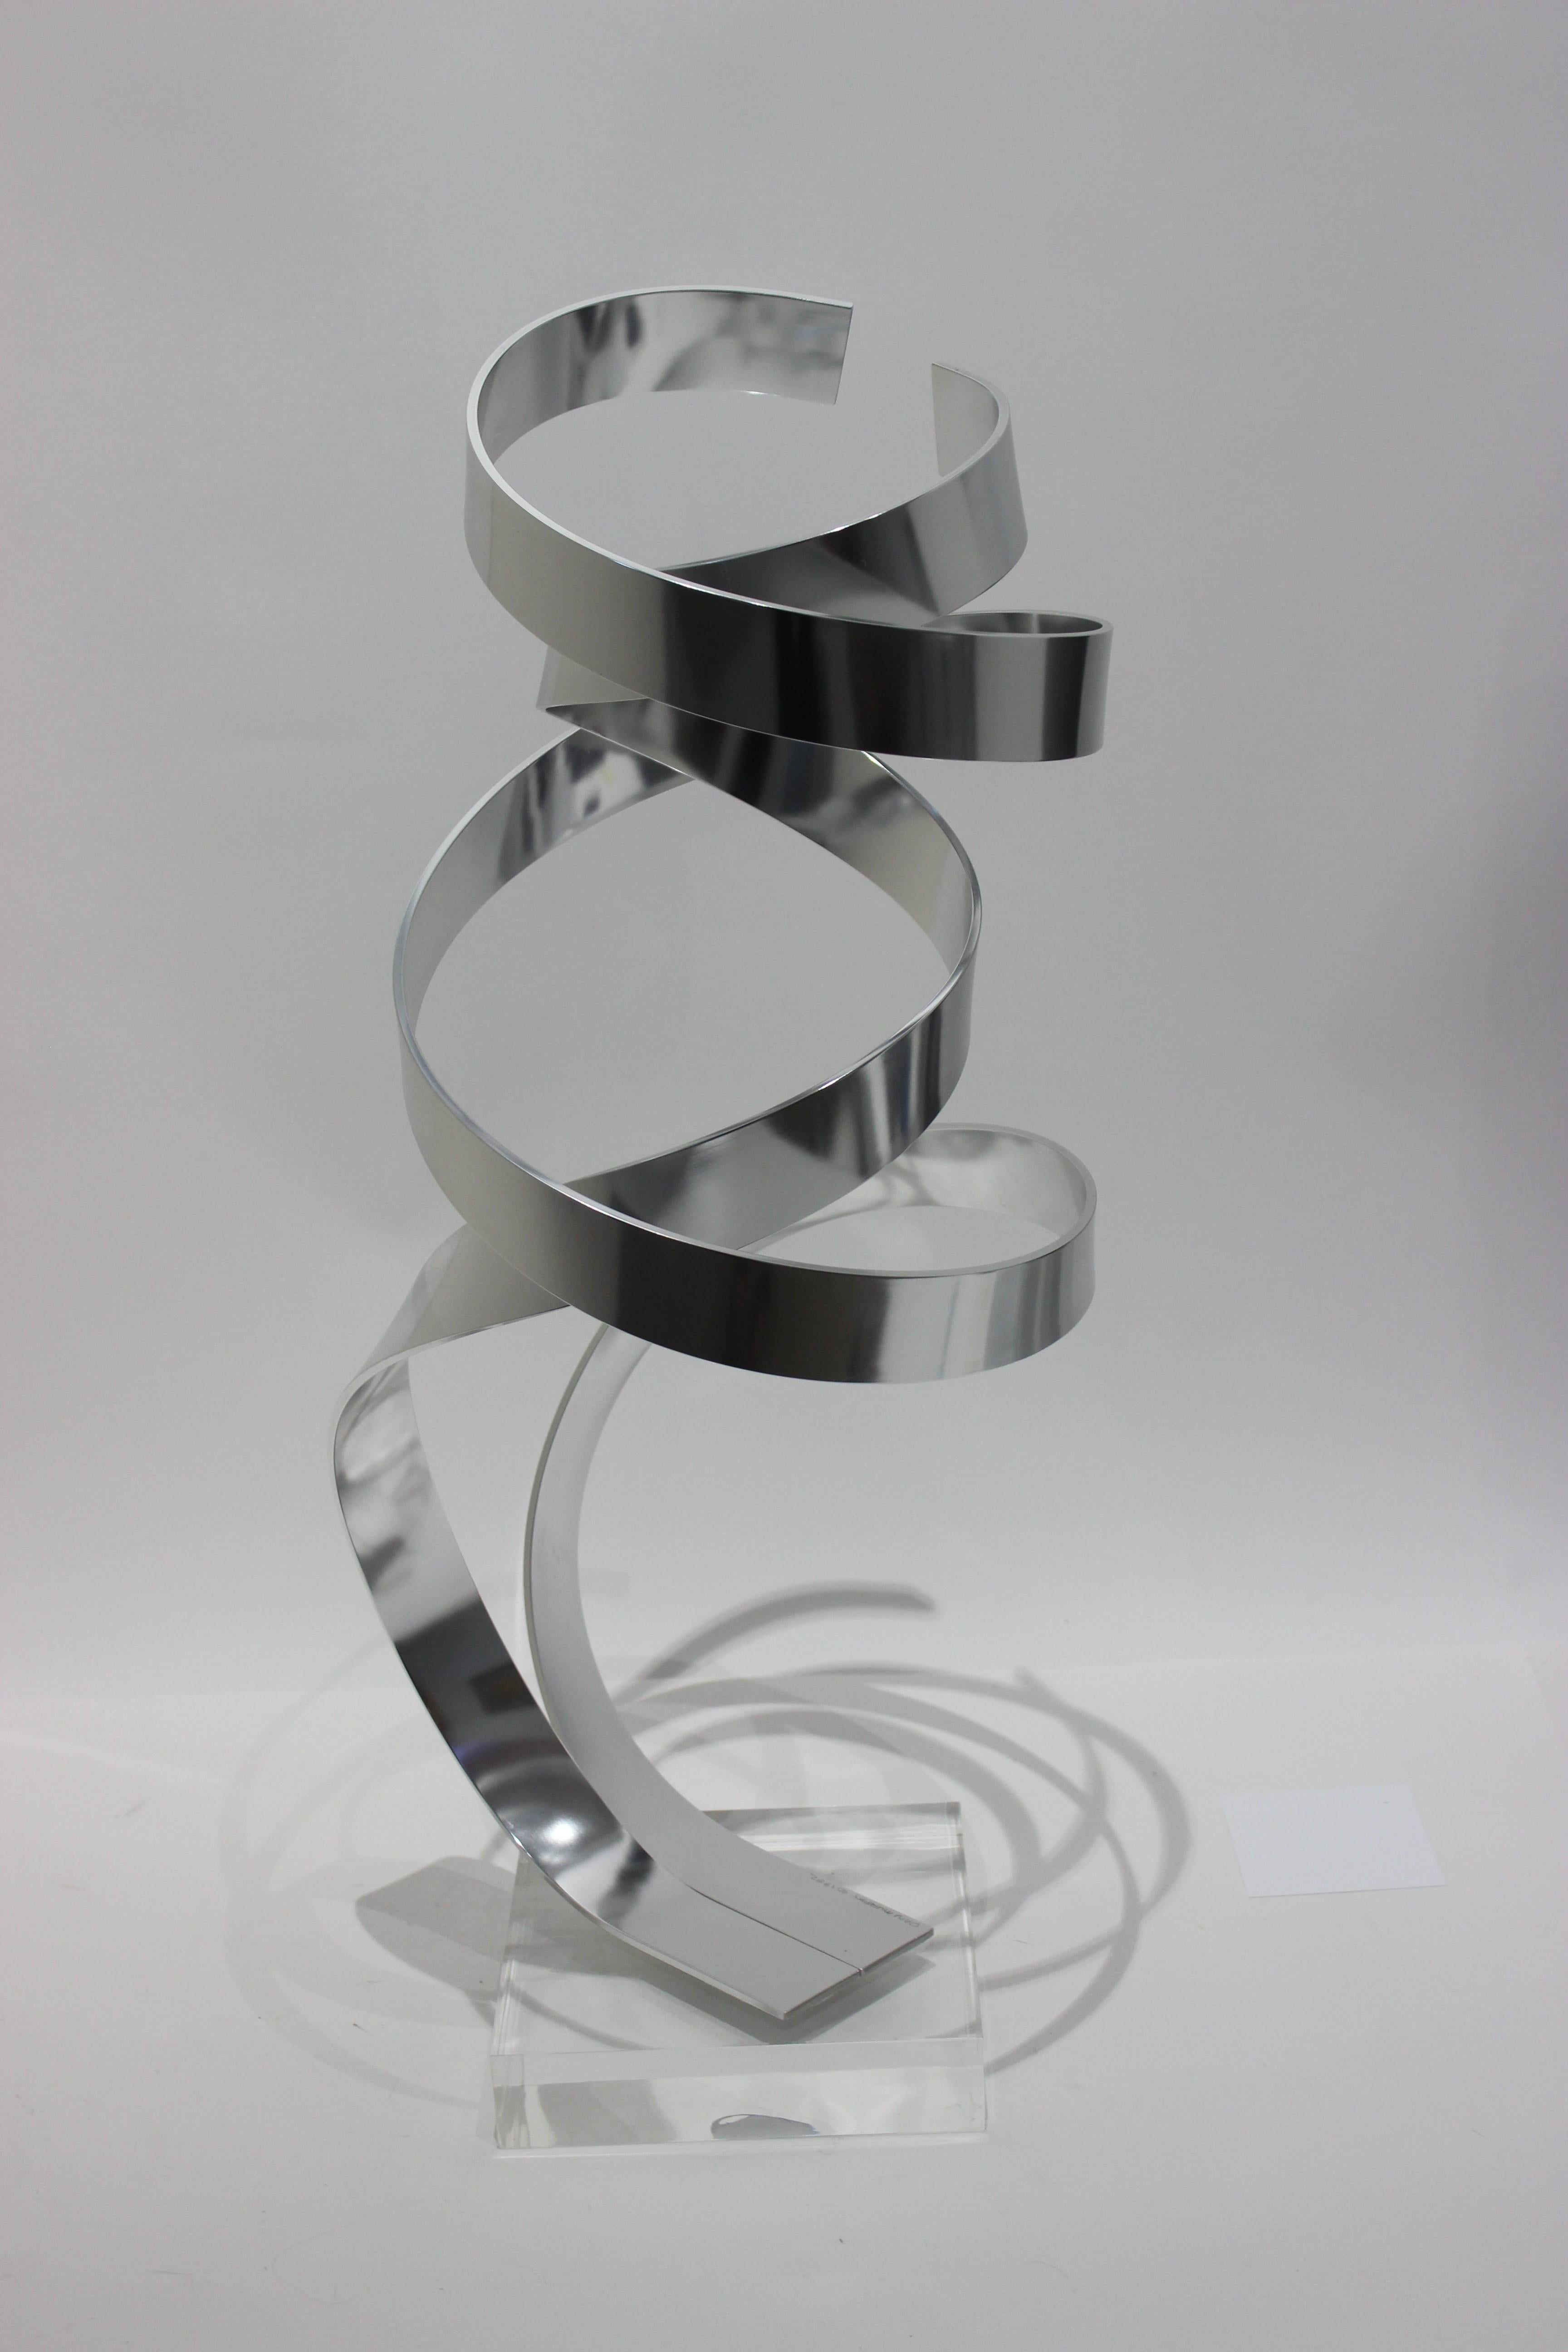 Polished Kinetic Abstract Sculpture by Dan Murphy